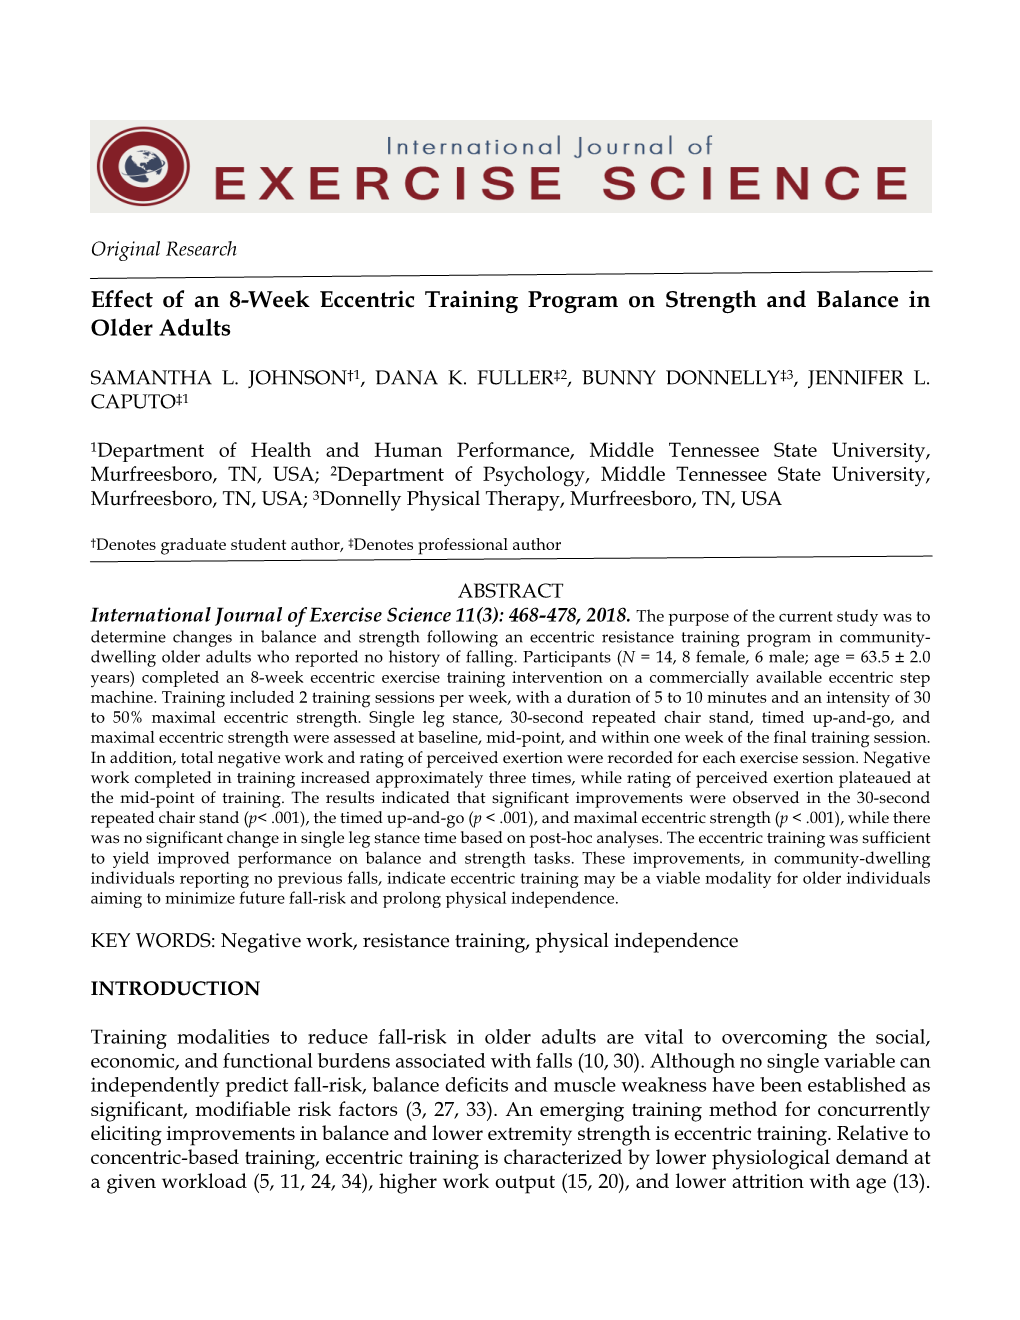 Effect of an 8-Week Eccentric Training Program on Strength and Balance in Older Adults